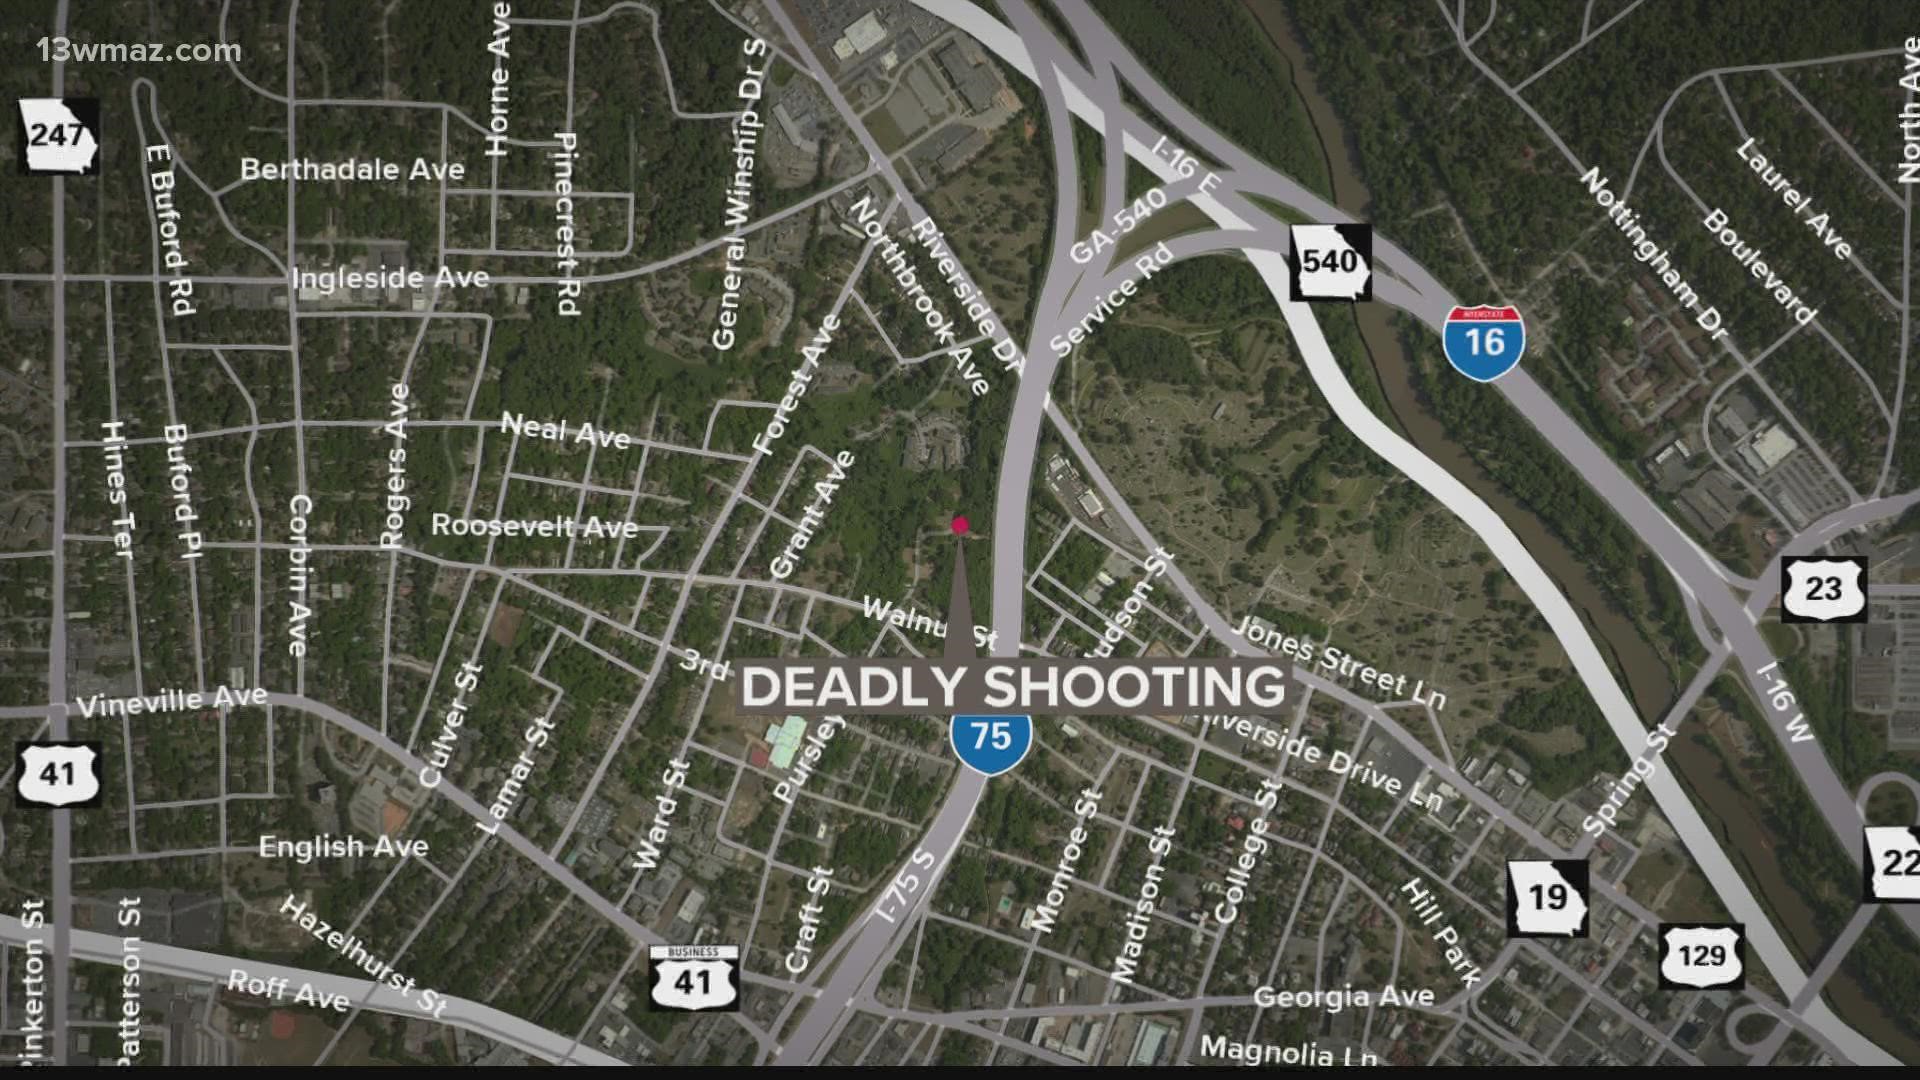 The shooting was called into the Macon-Bibb 911 Center just before 12:30 a.m.